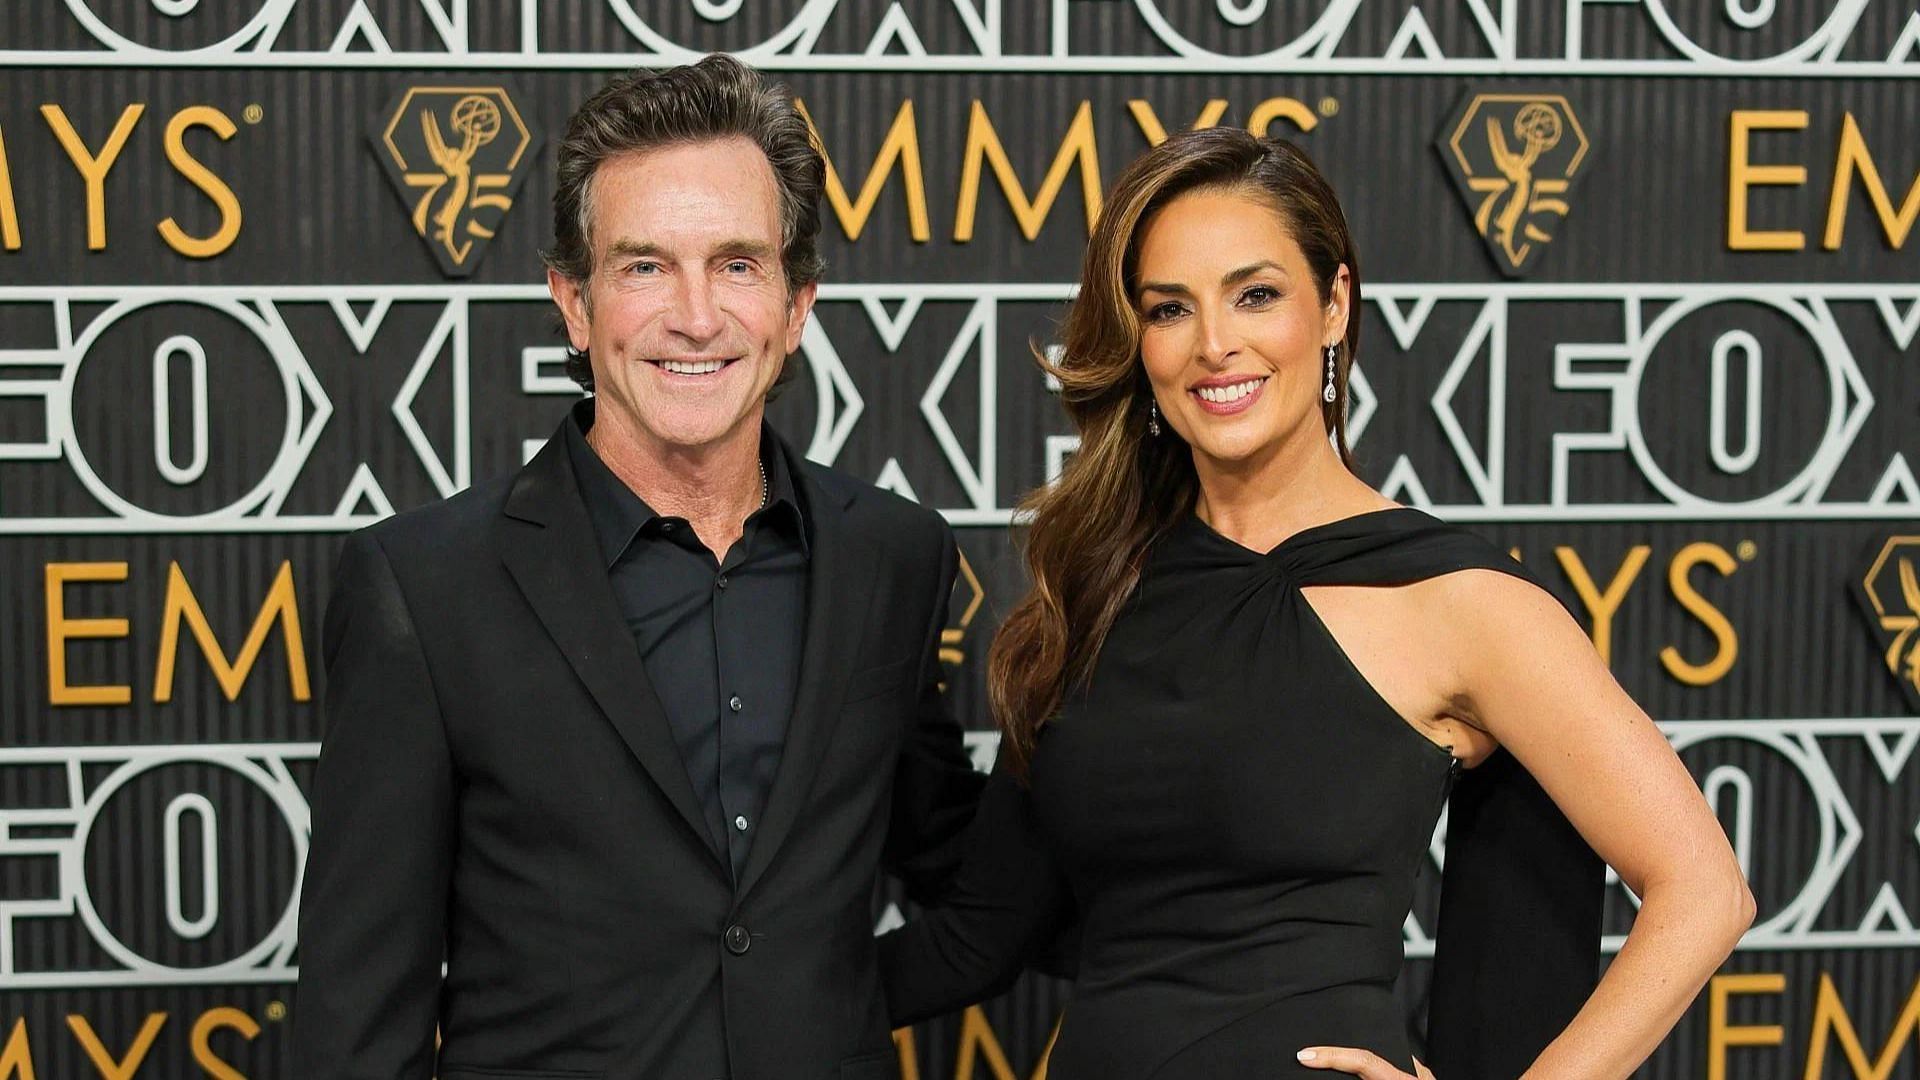 Survivor host Jeff Probst with his wife Lisa Ann Russell (Image via Neilson Barnard/Getty Images)